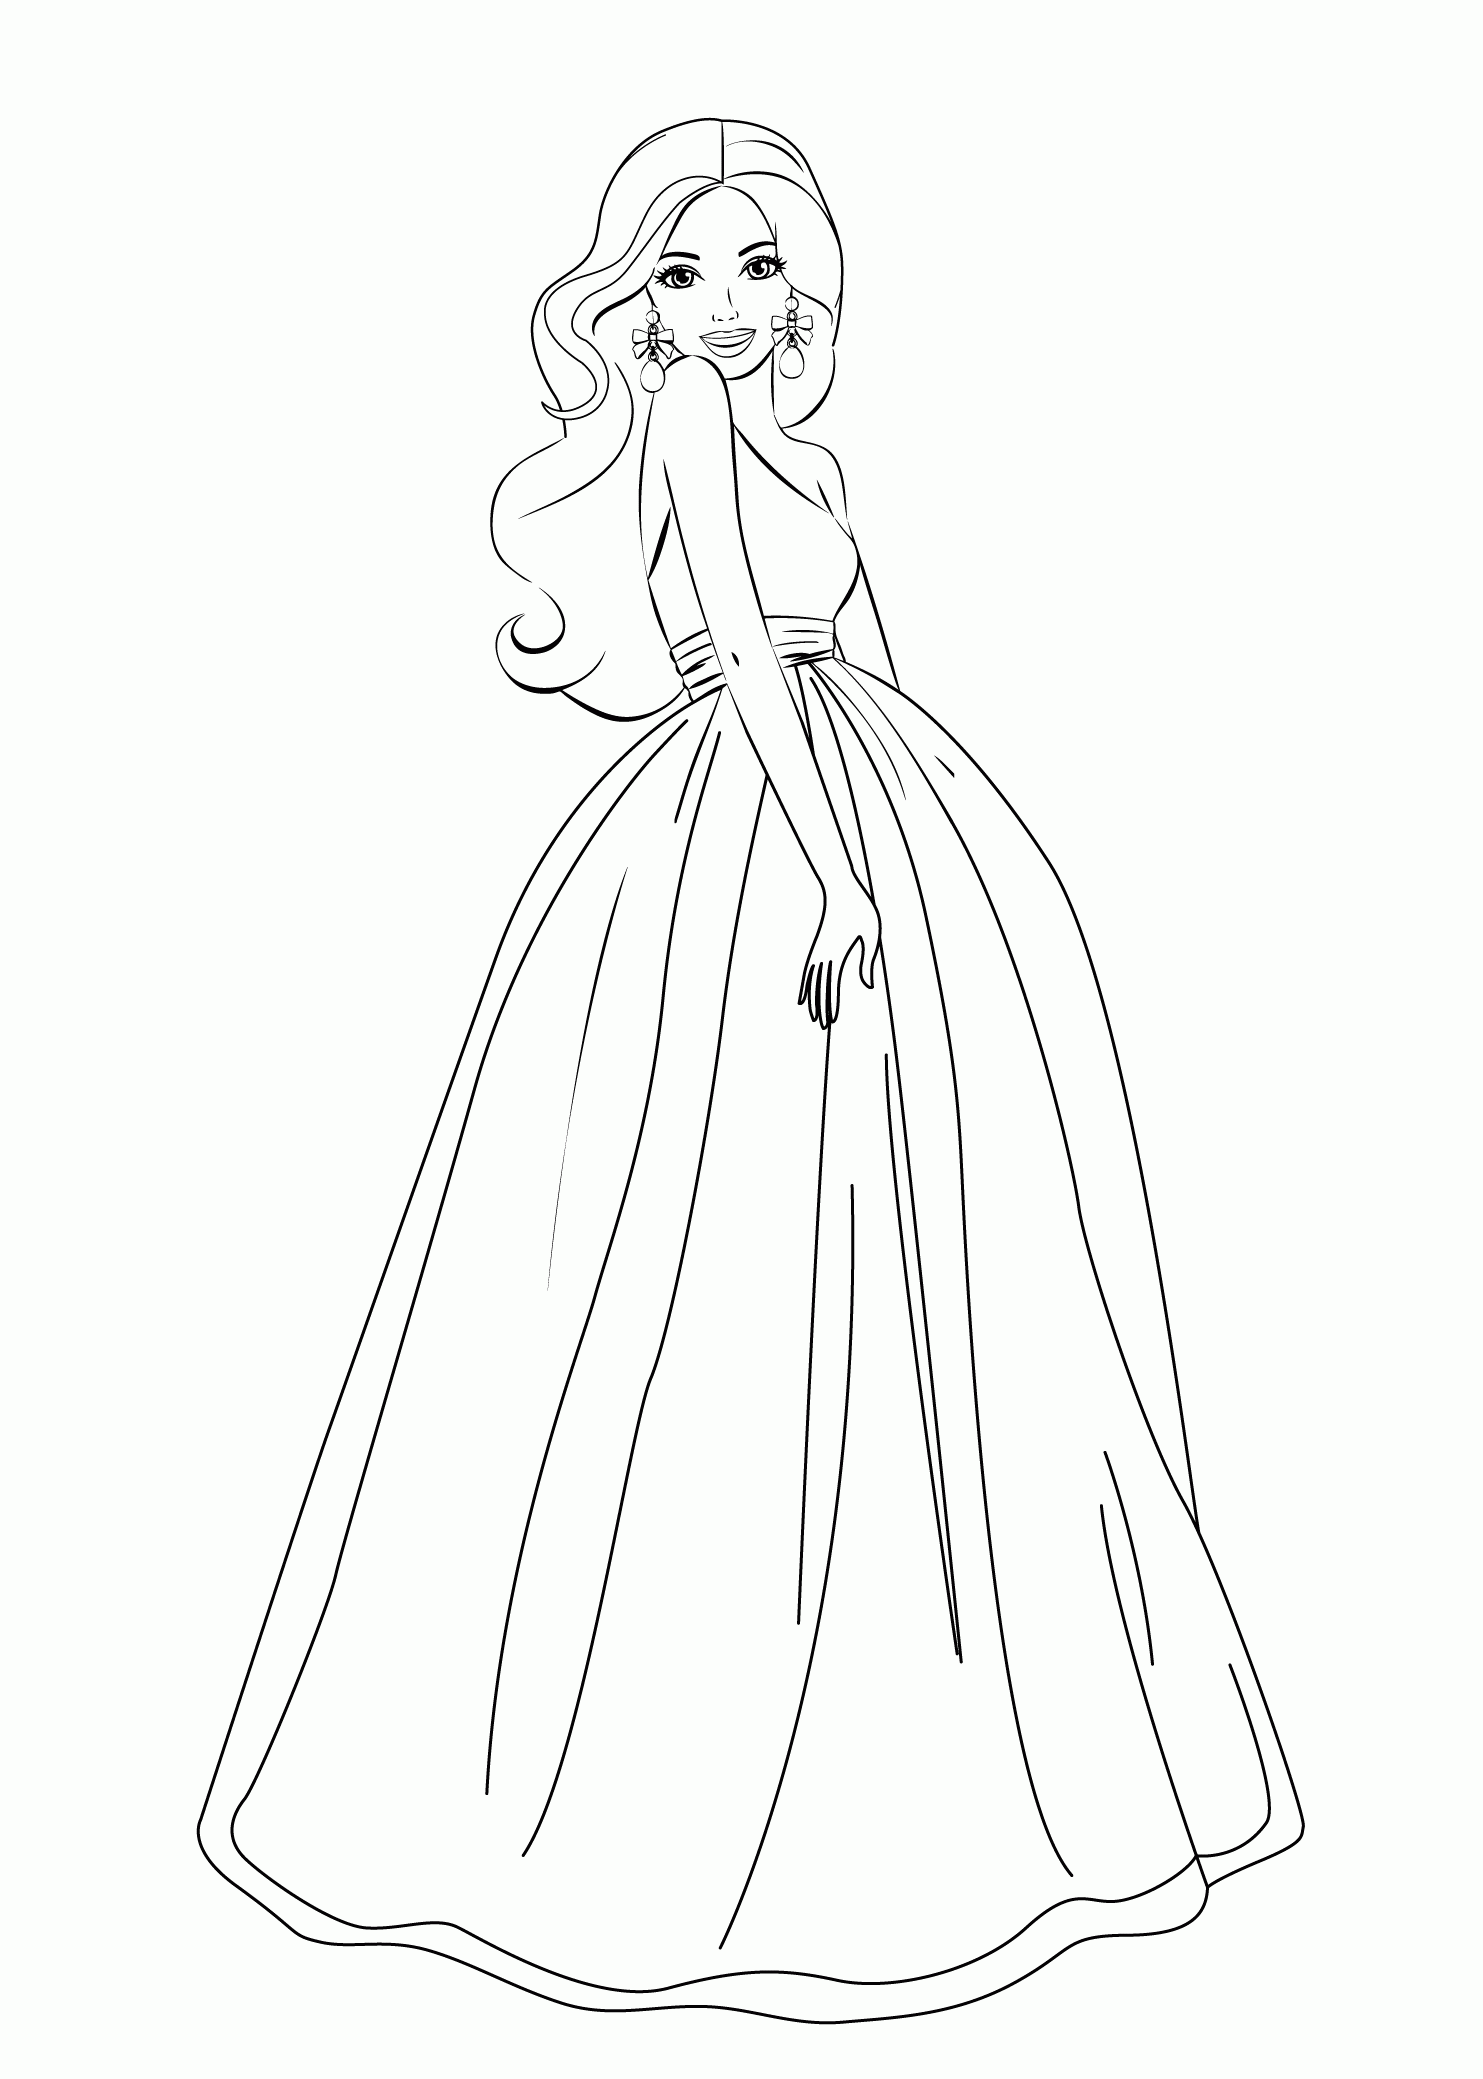 Download Barbie Coloring Pages Pdf - Coloring Home